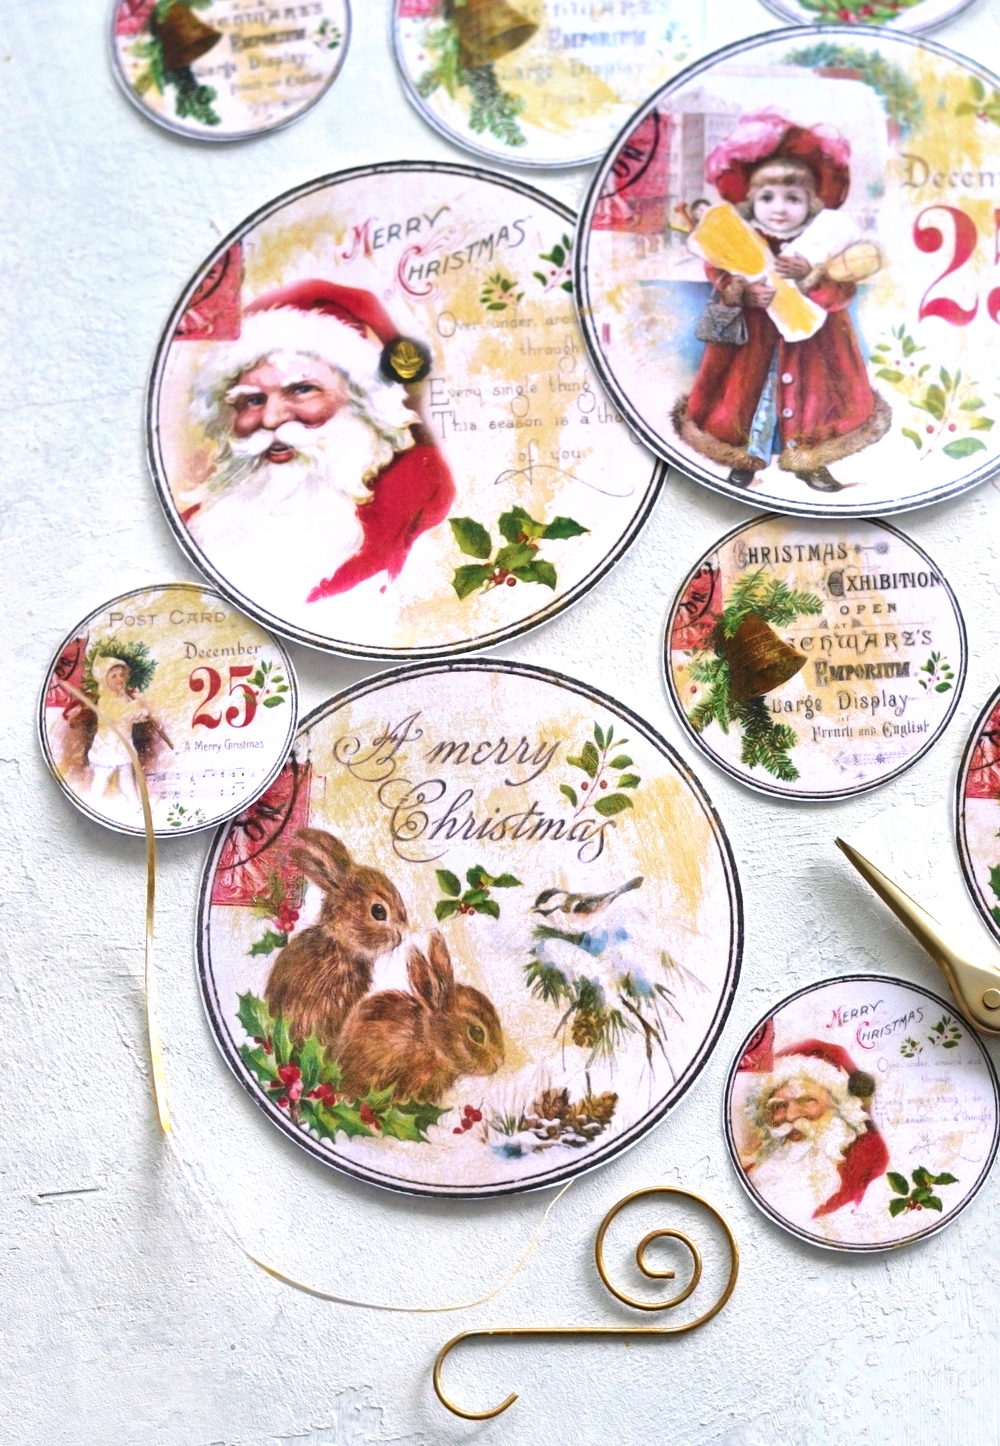 Cupcake Toppers 2.5 inch Circles of Vintage Christmas Books for Tags Ornaments Scrapbooking INSTANT DOWNLOAD DIY Printables